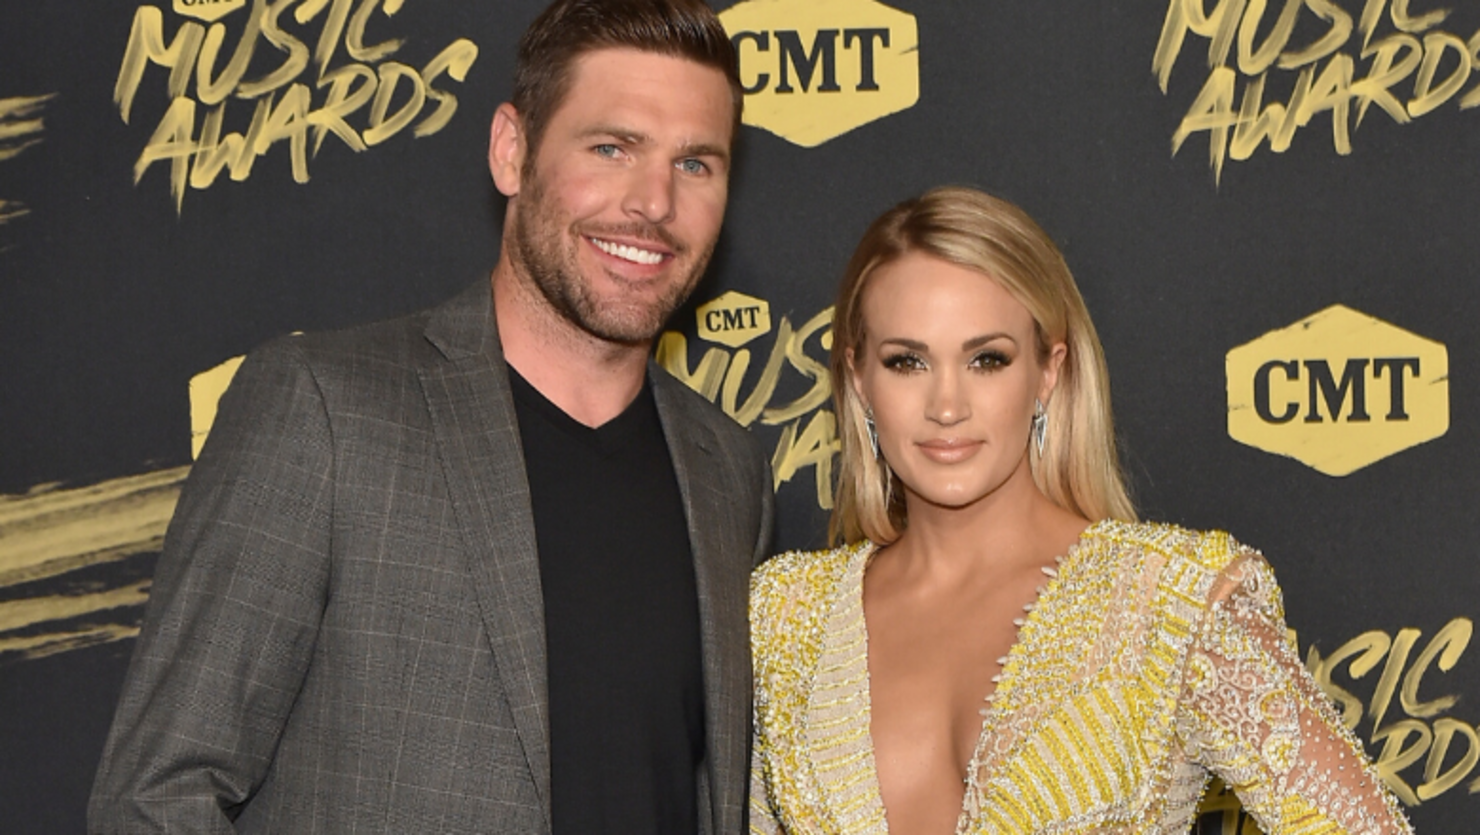 Carrie Underwood Prioritizes Time With Husband Mike Fisher Every Evening